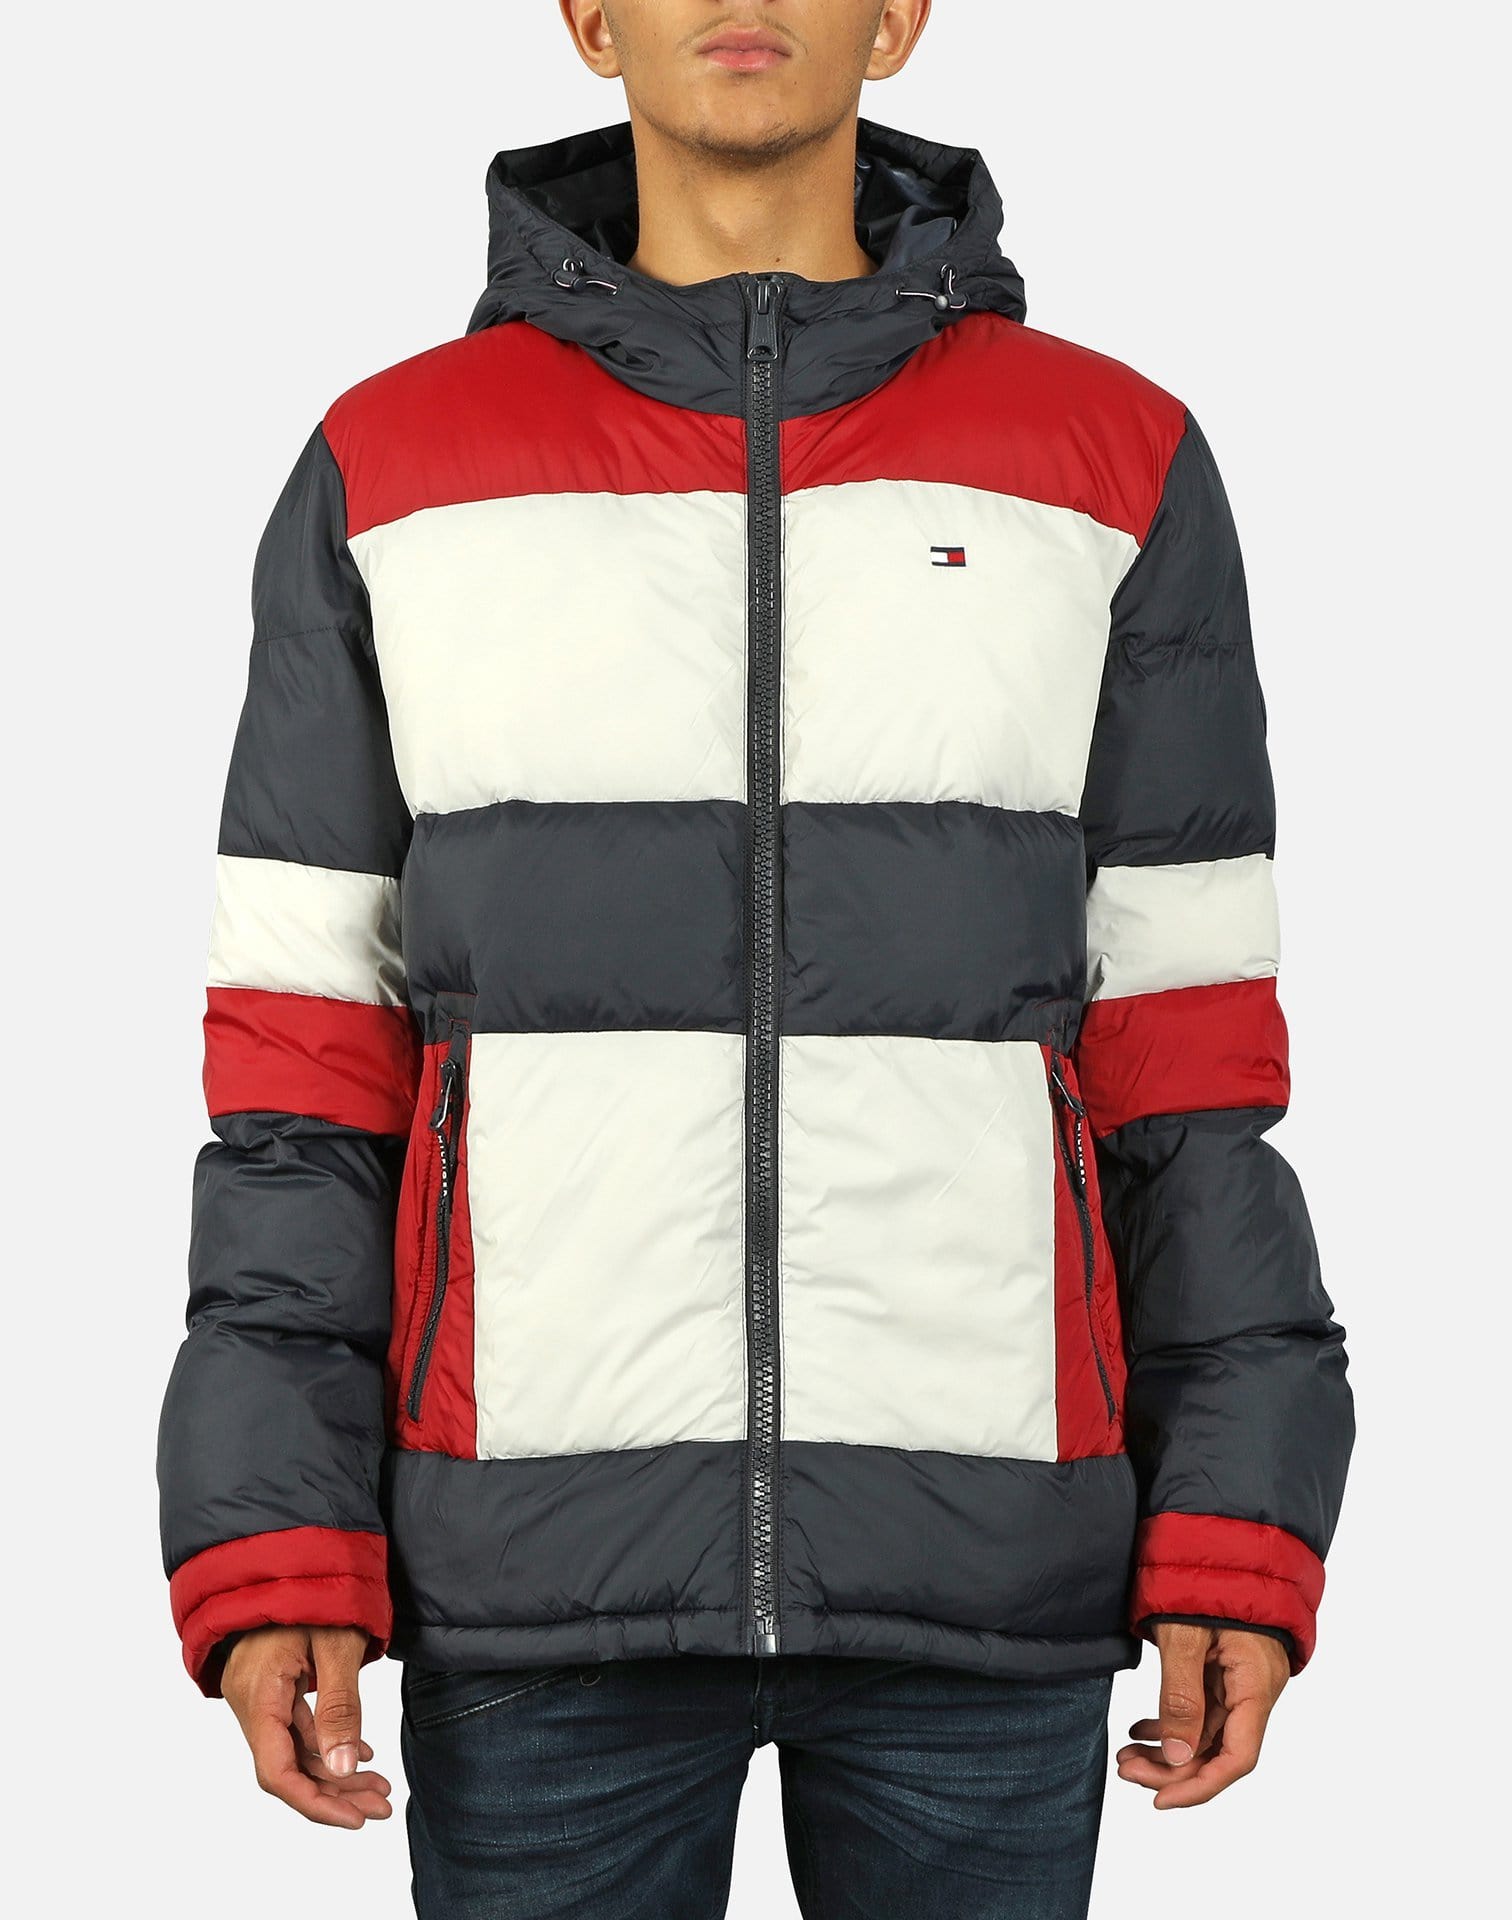 tommy hilfiger jacket colorblock puffer